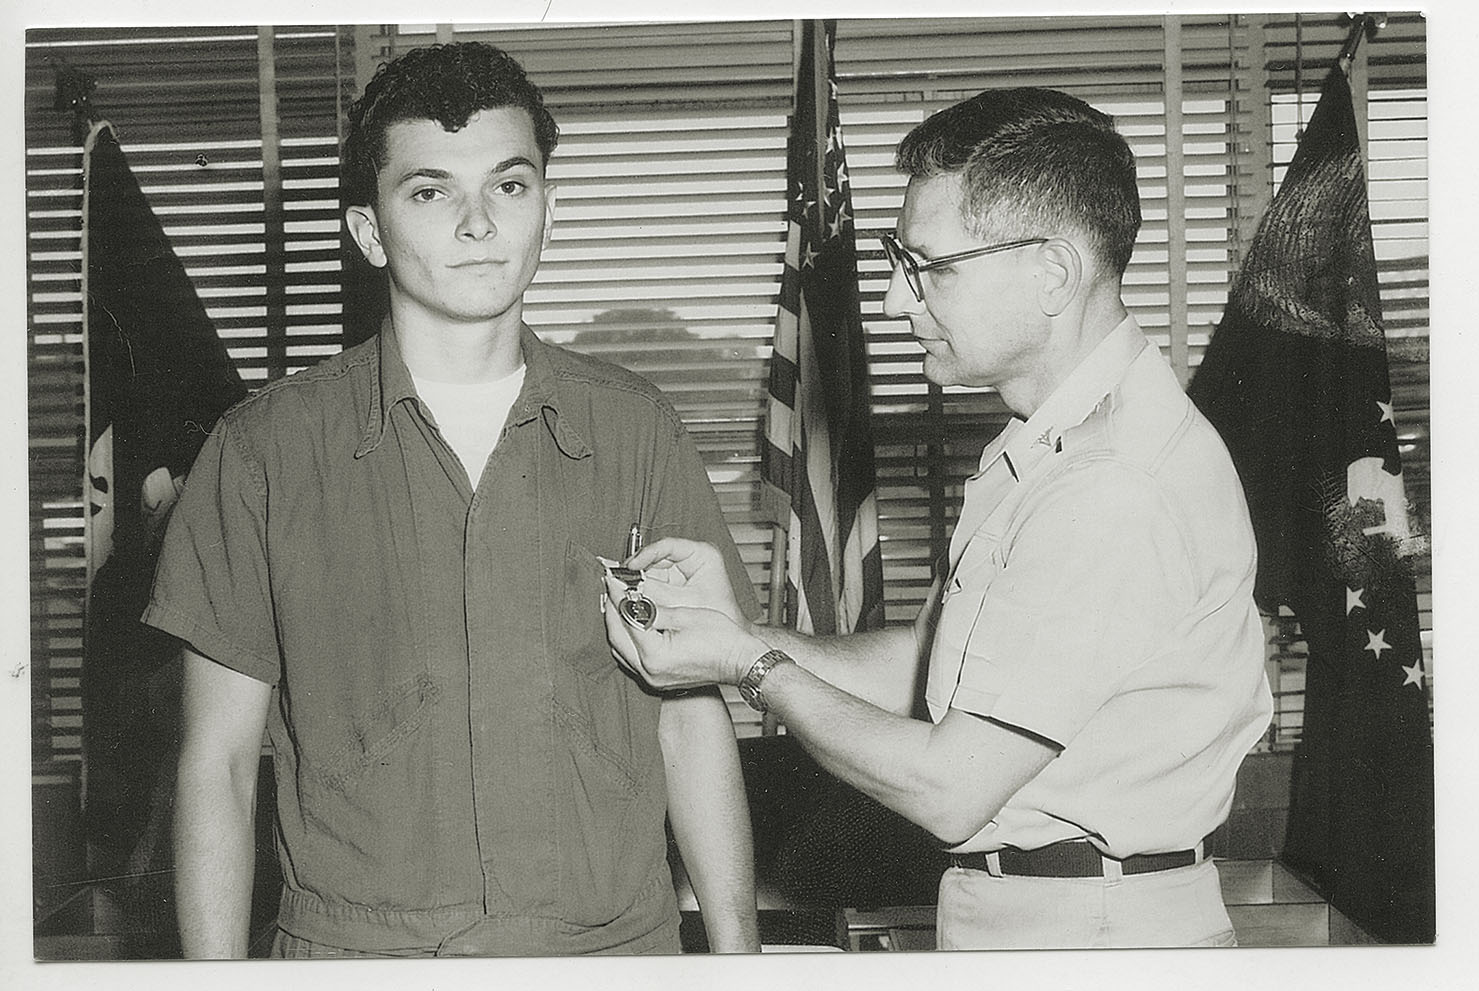 Renza receives a Purple Heart in July 1967 at Camp Zama, Japan. He was wounded in an ambush that left 21 of his comrades dead. / Courtesy Victor Renza